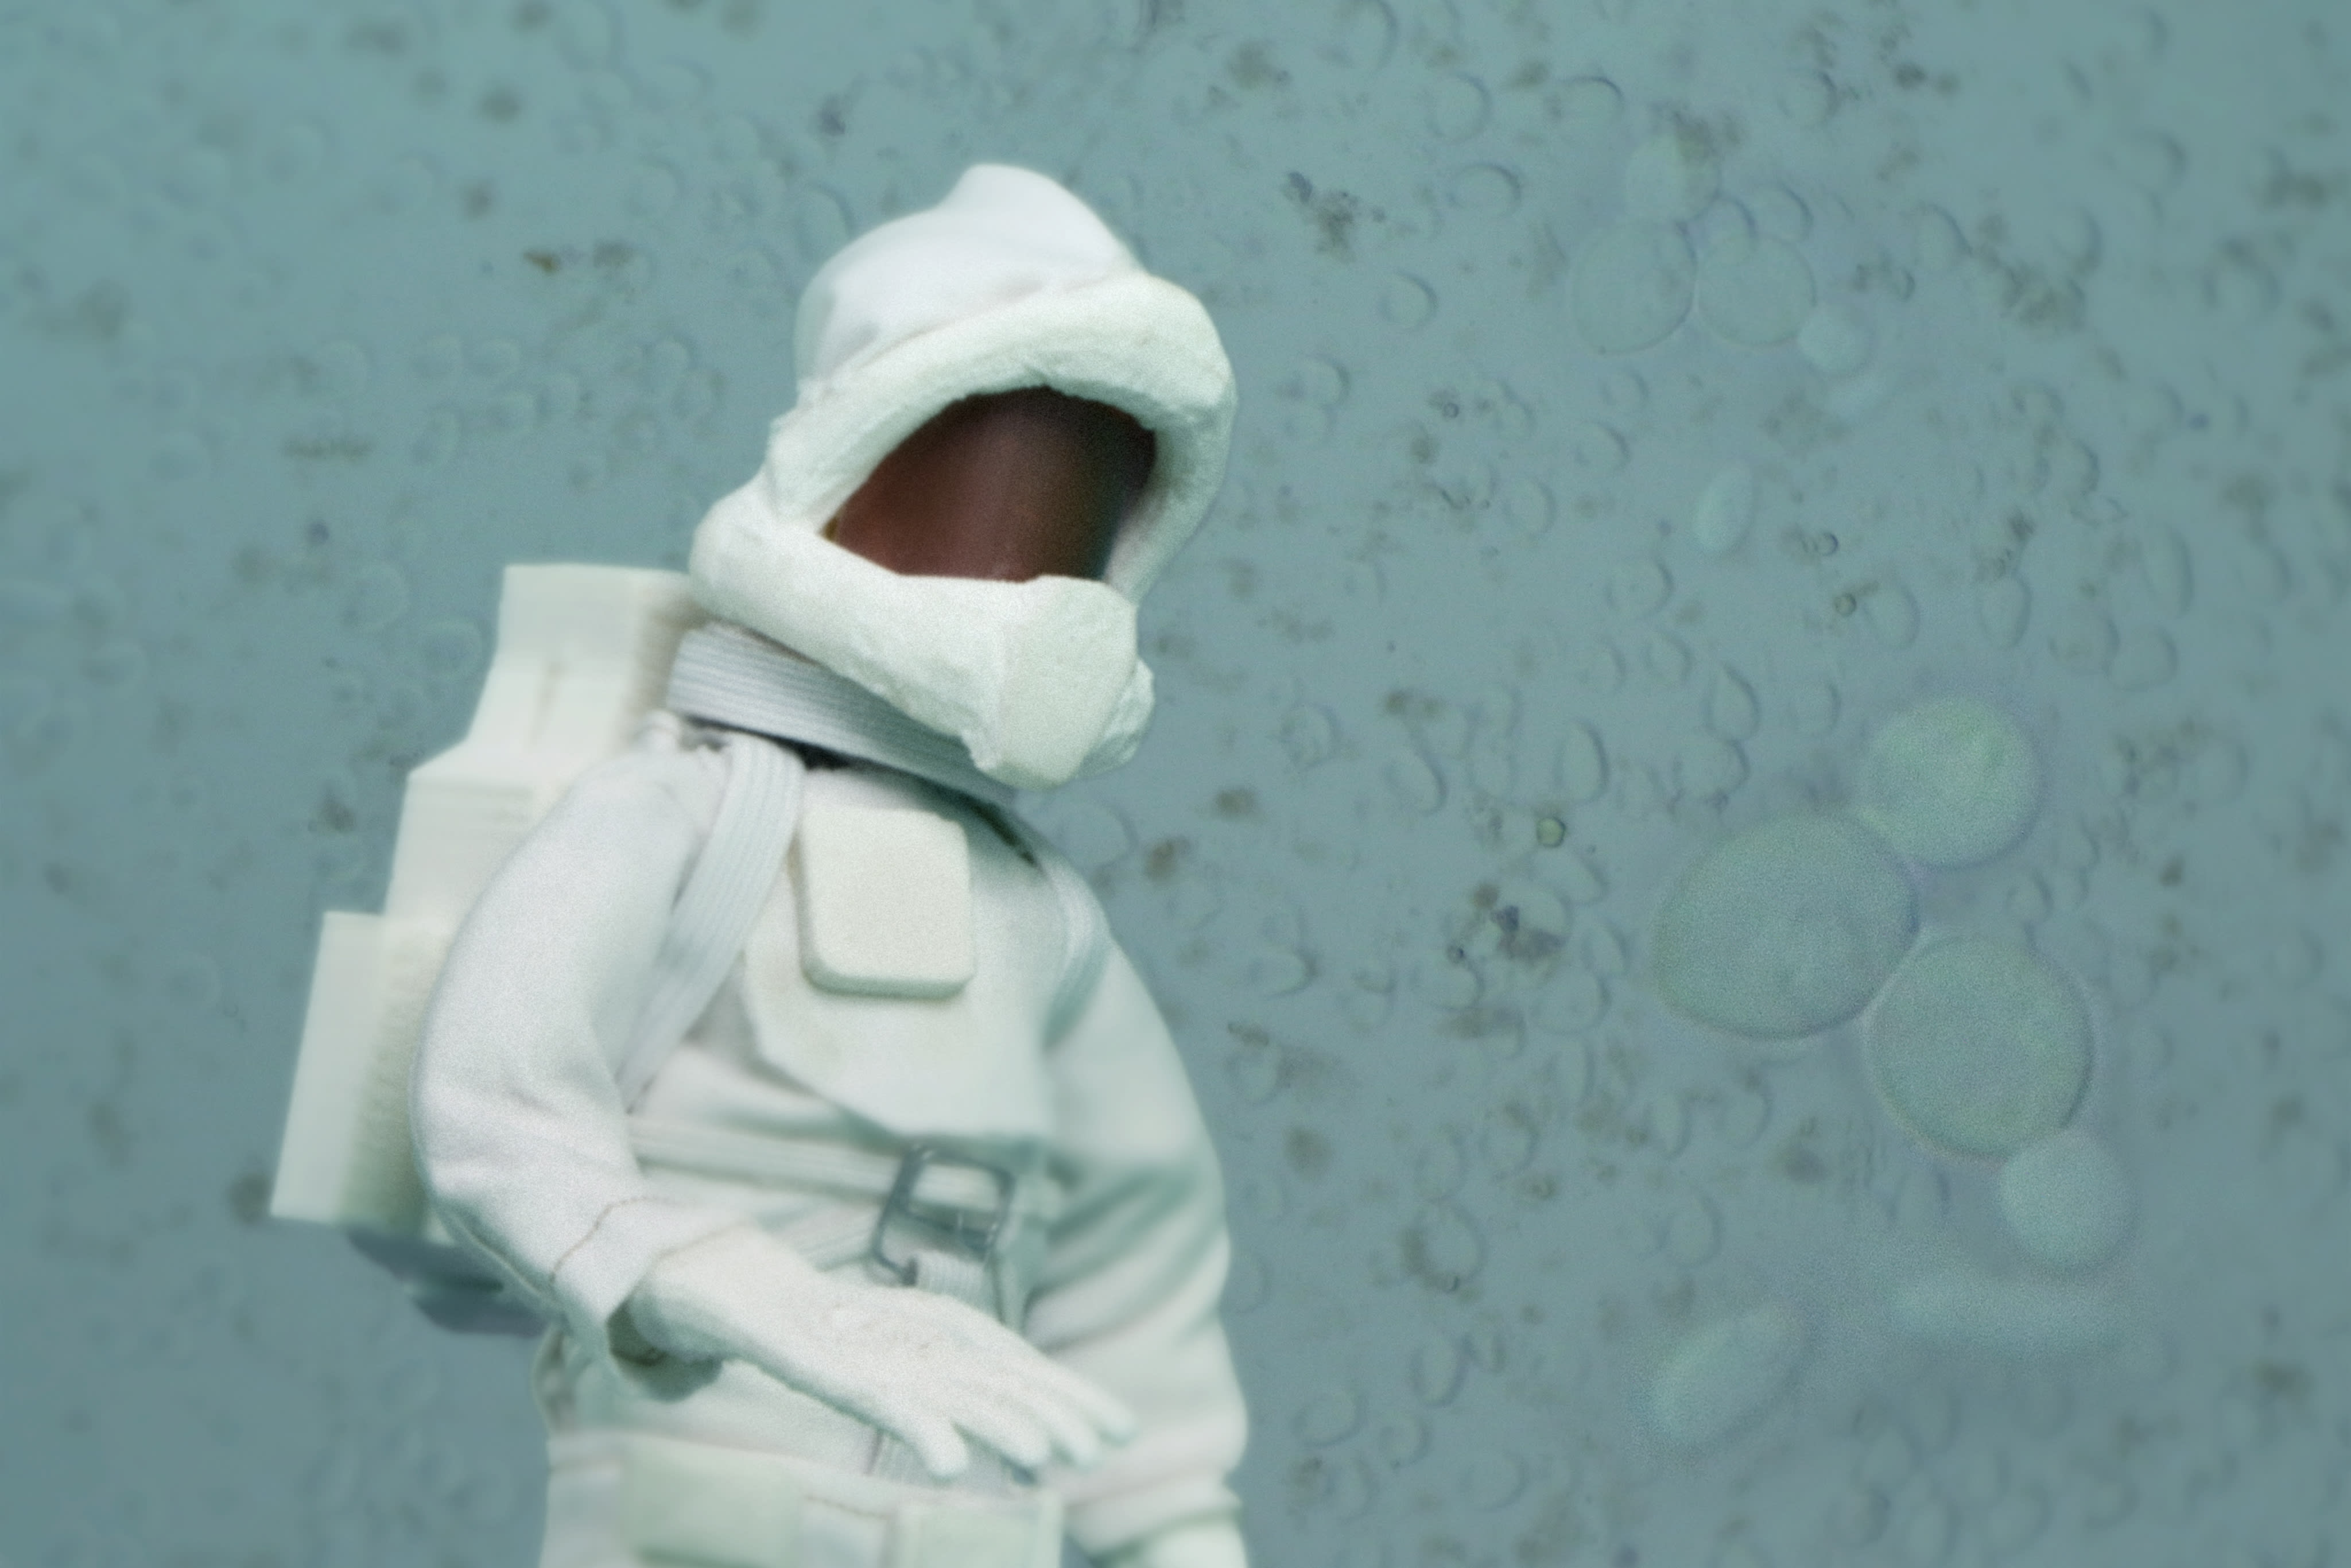 An astronaut standing in front of blue microbes